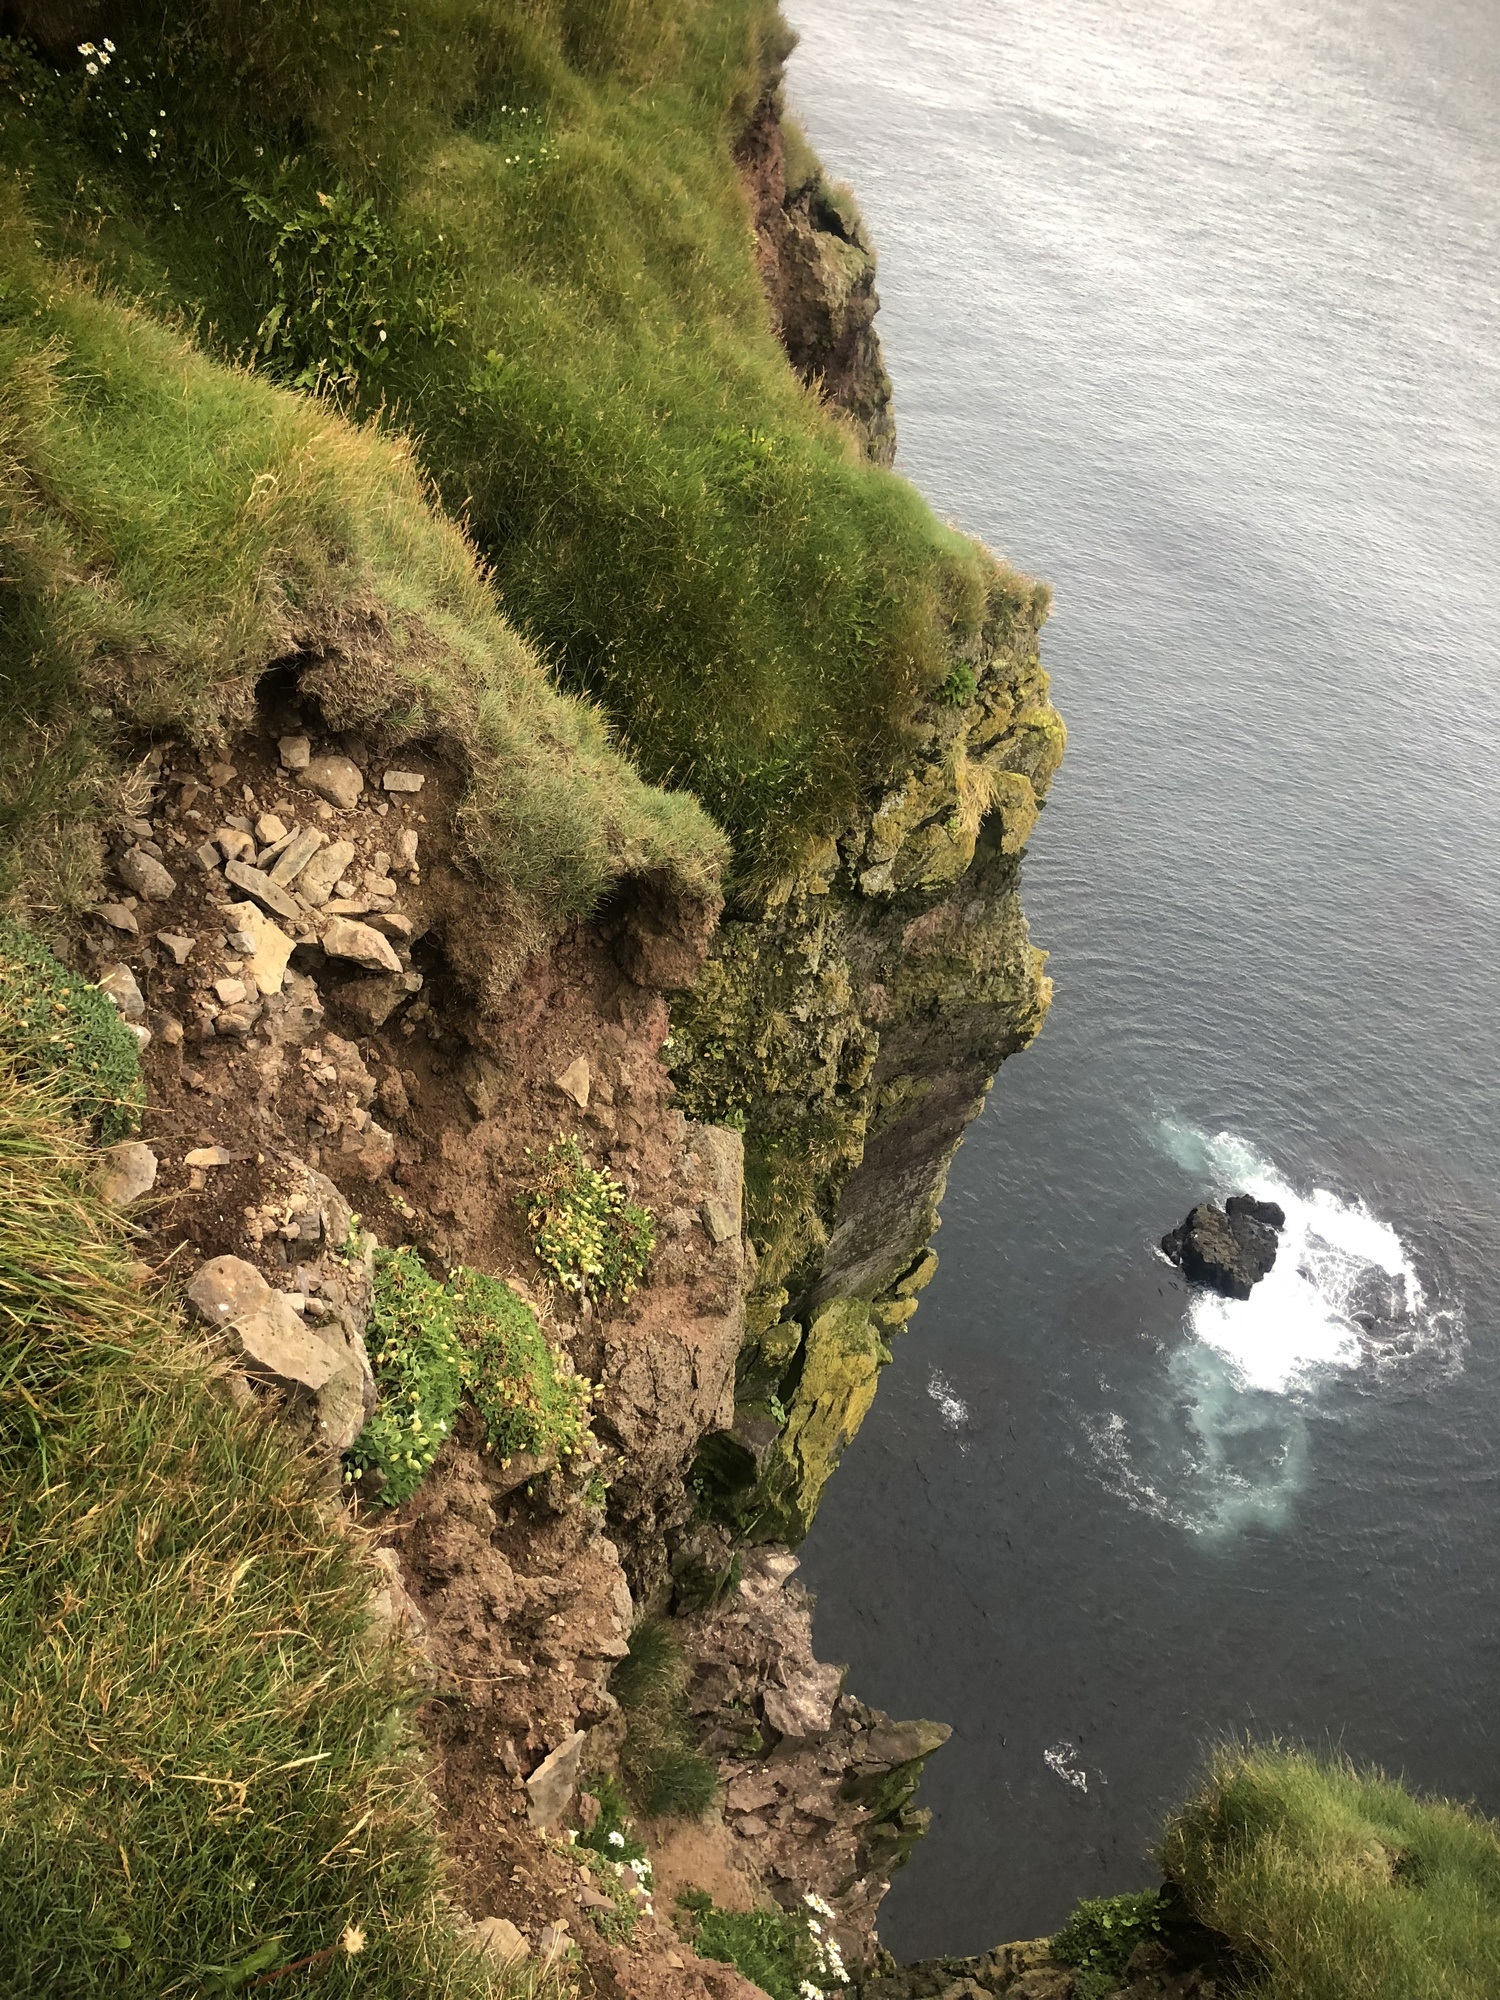 Peering over a cliff's edge